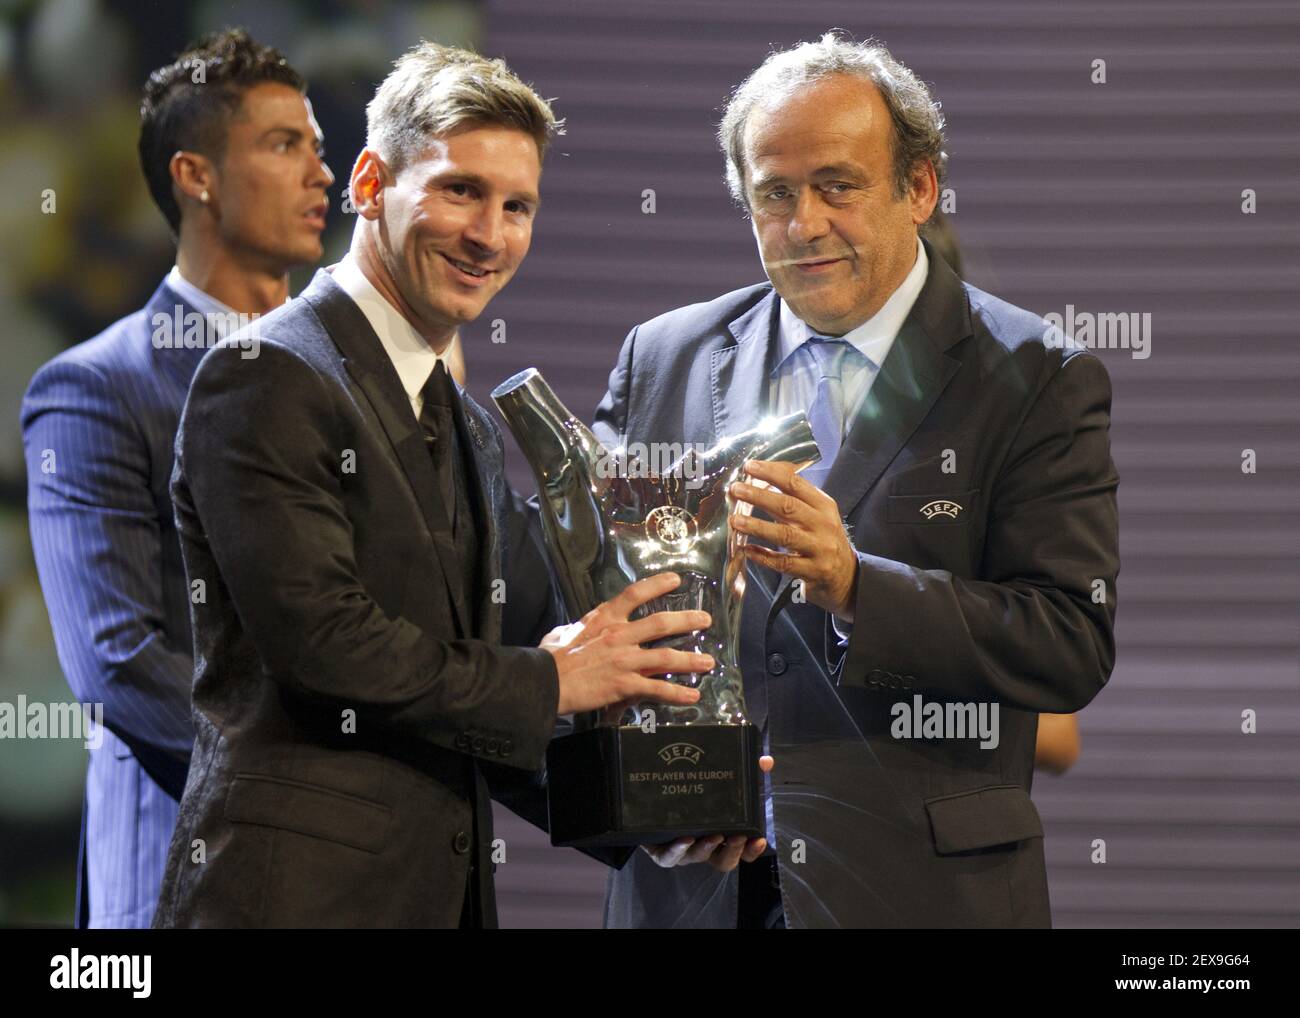 Monaco, Monte Carlo - August 27, 2015: UEFA Champions League Draw in Monaco with Michel Platini and Lionel Messi receiving the UEFA Best Player in Europe Award (Photo by Mandoga Media) *** Please Use Credit from Credit Field *** Stock Photo